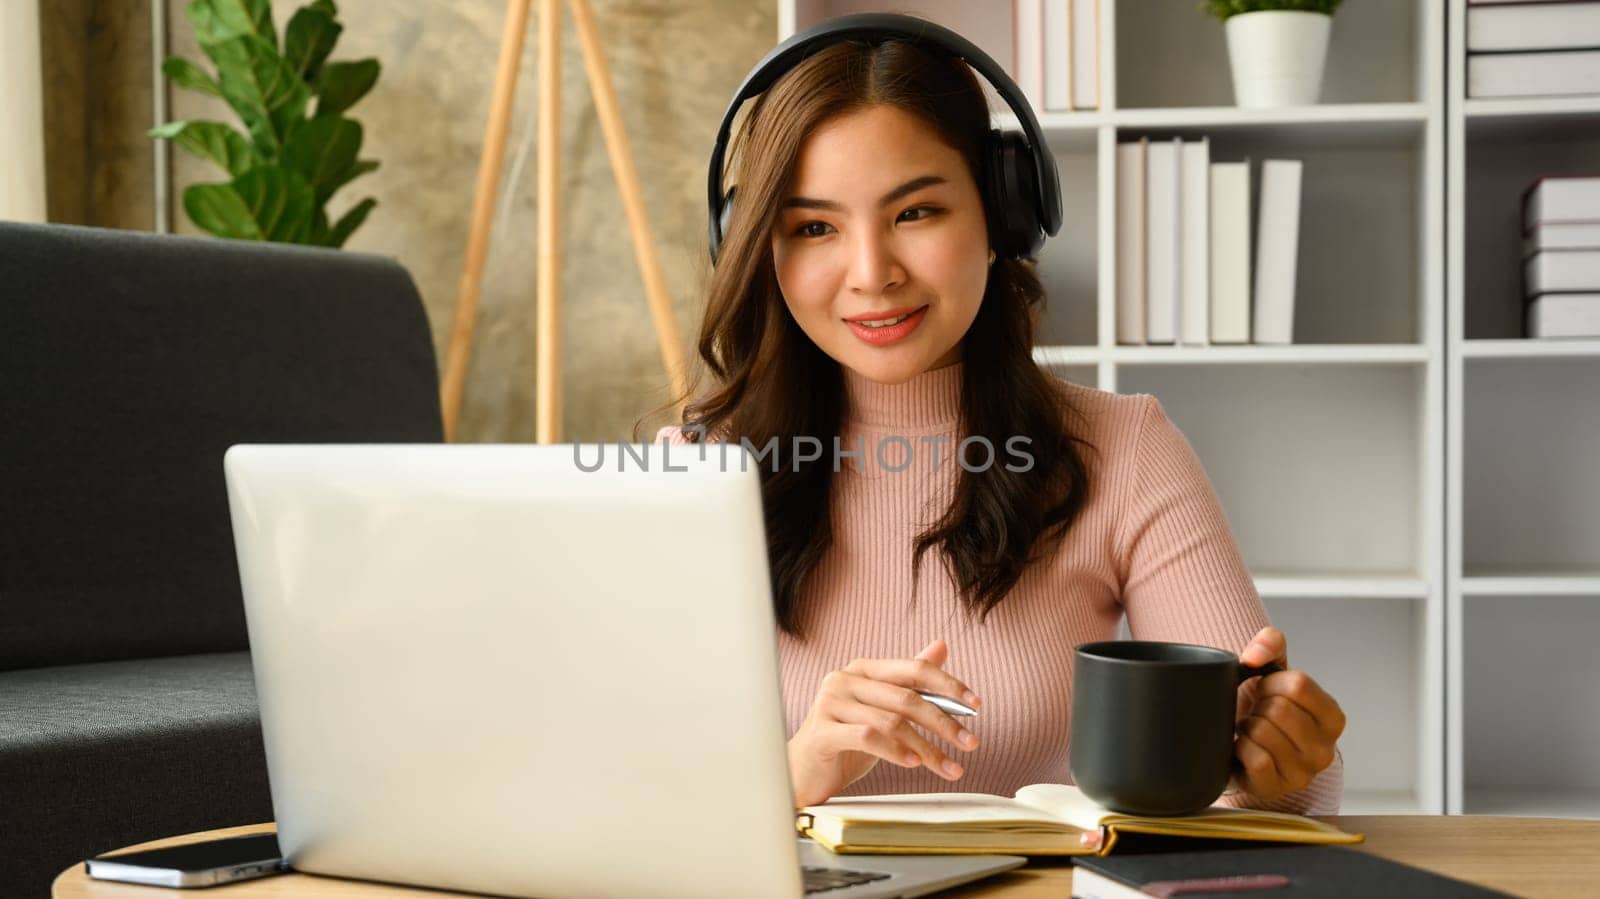 Attractive female student with wireless headphone learning distantly, watching online lecture on laptop screen.